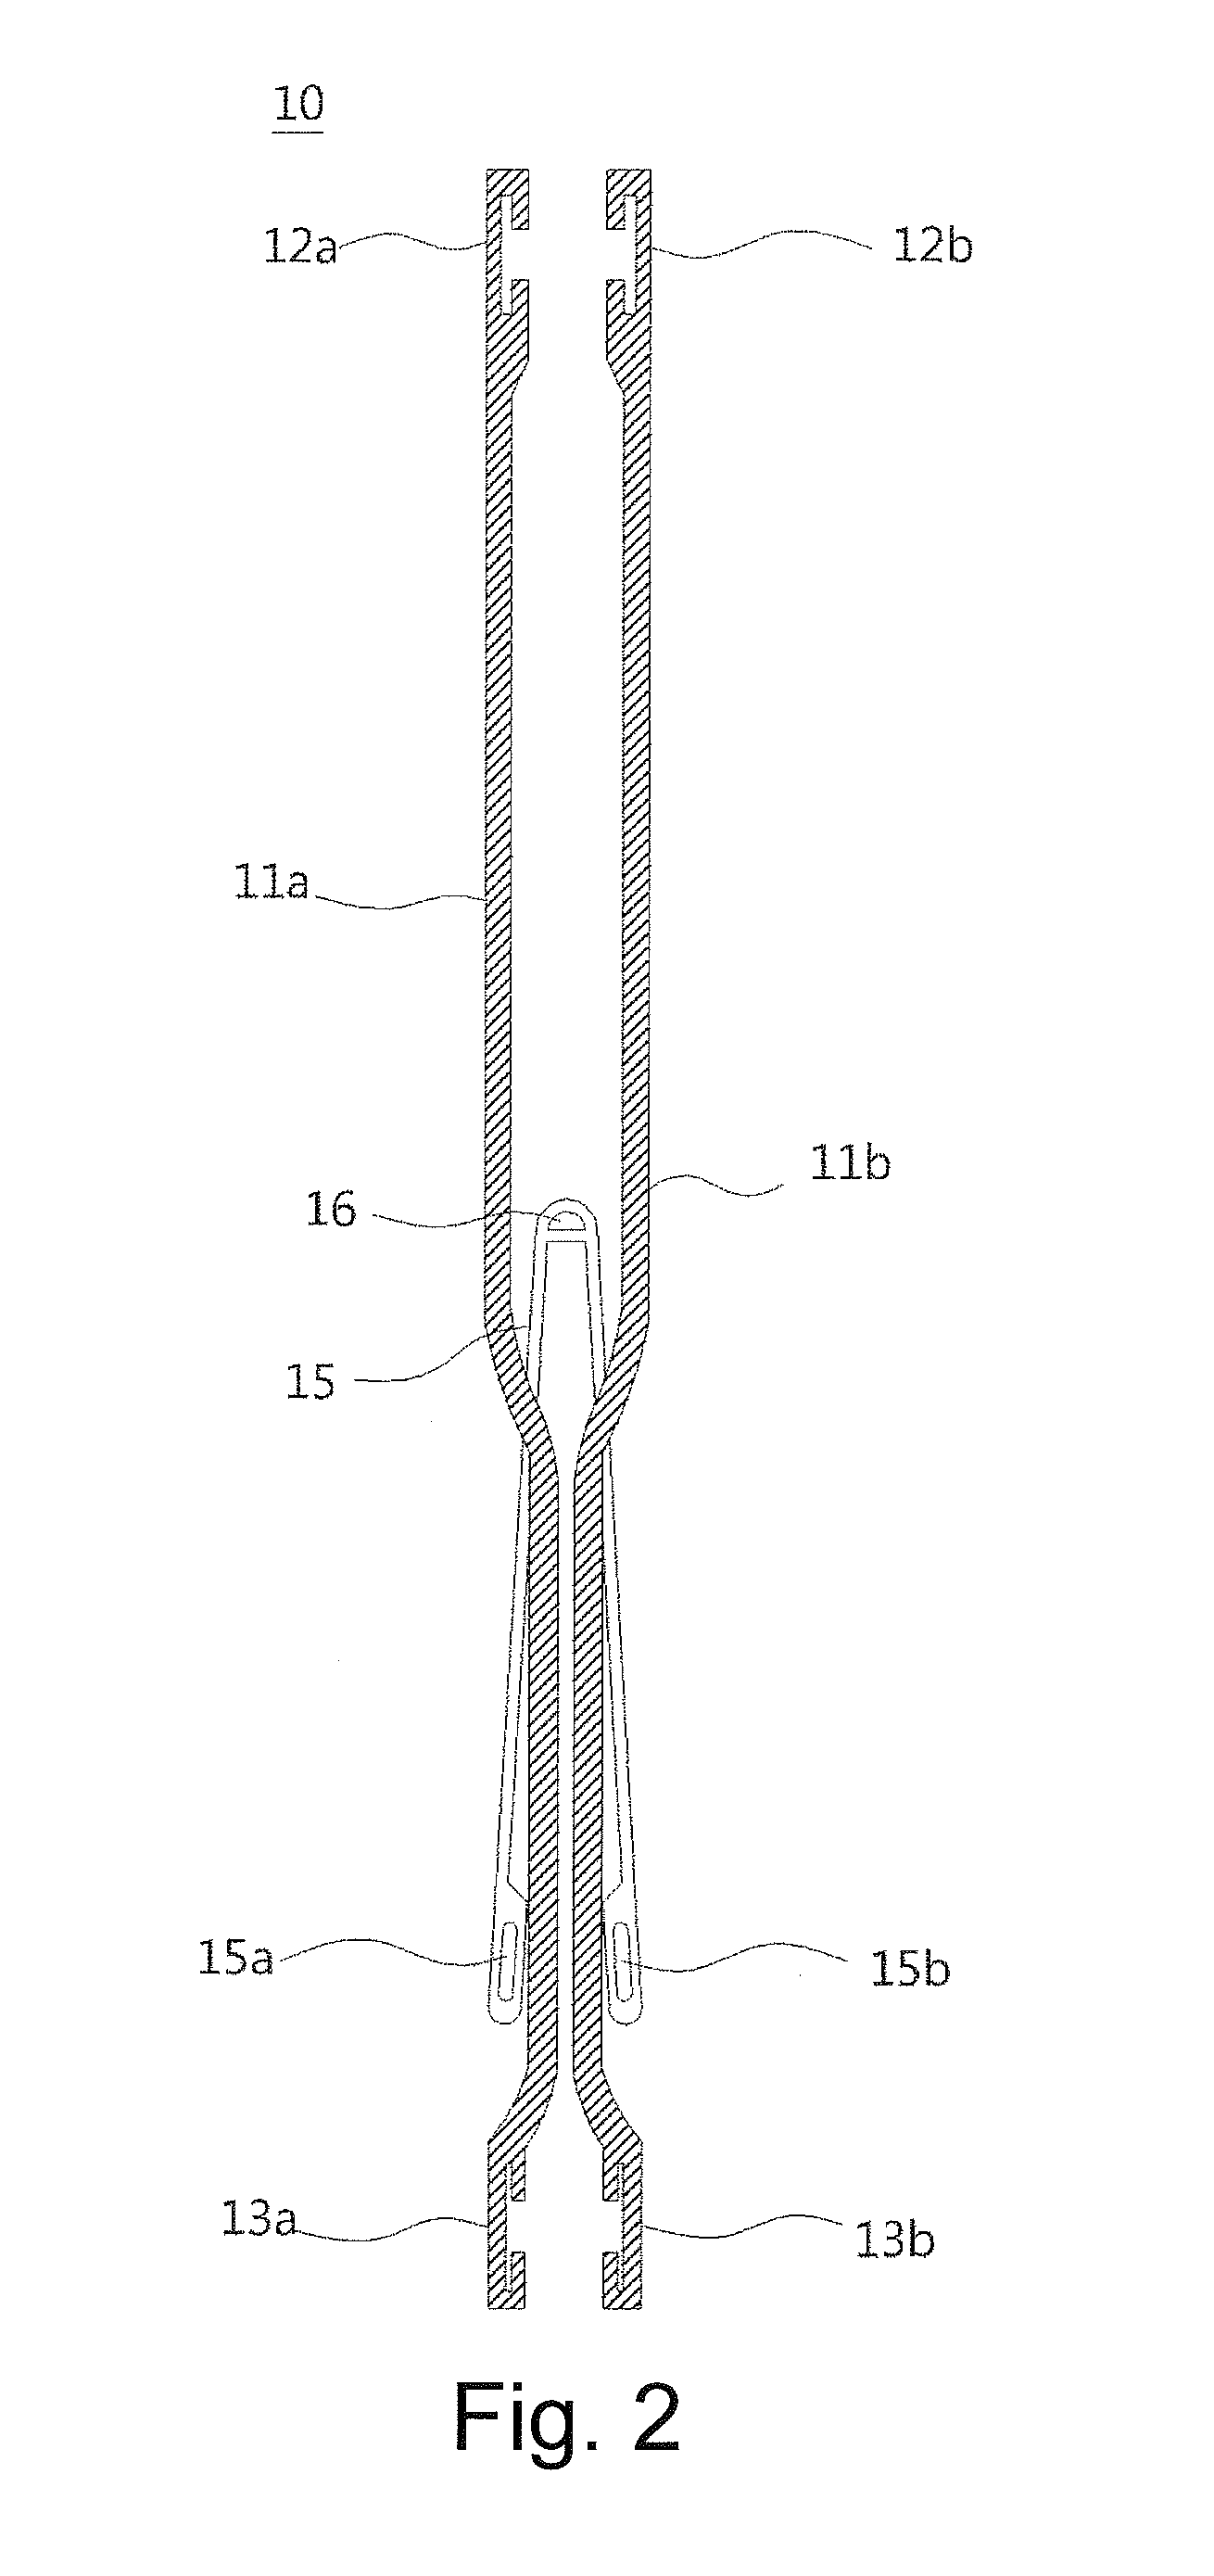 Loom for weaving fabric with two types of tissue, shoe upper woven using the same, and shoe